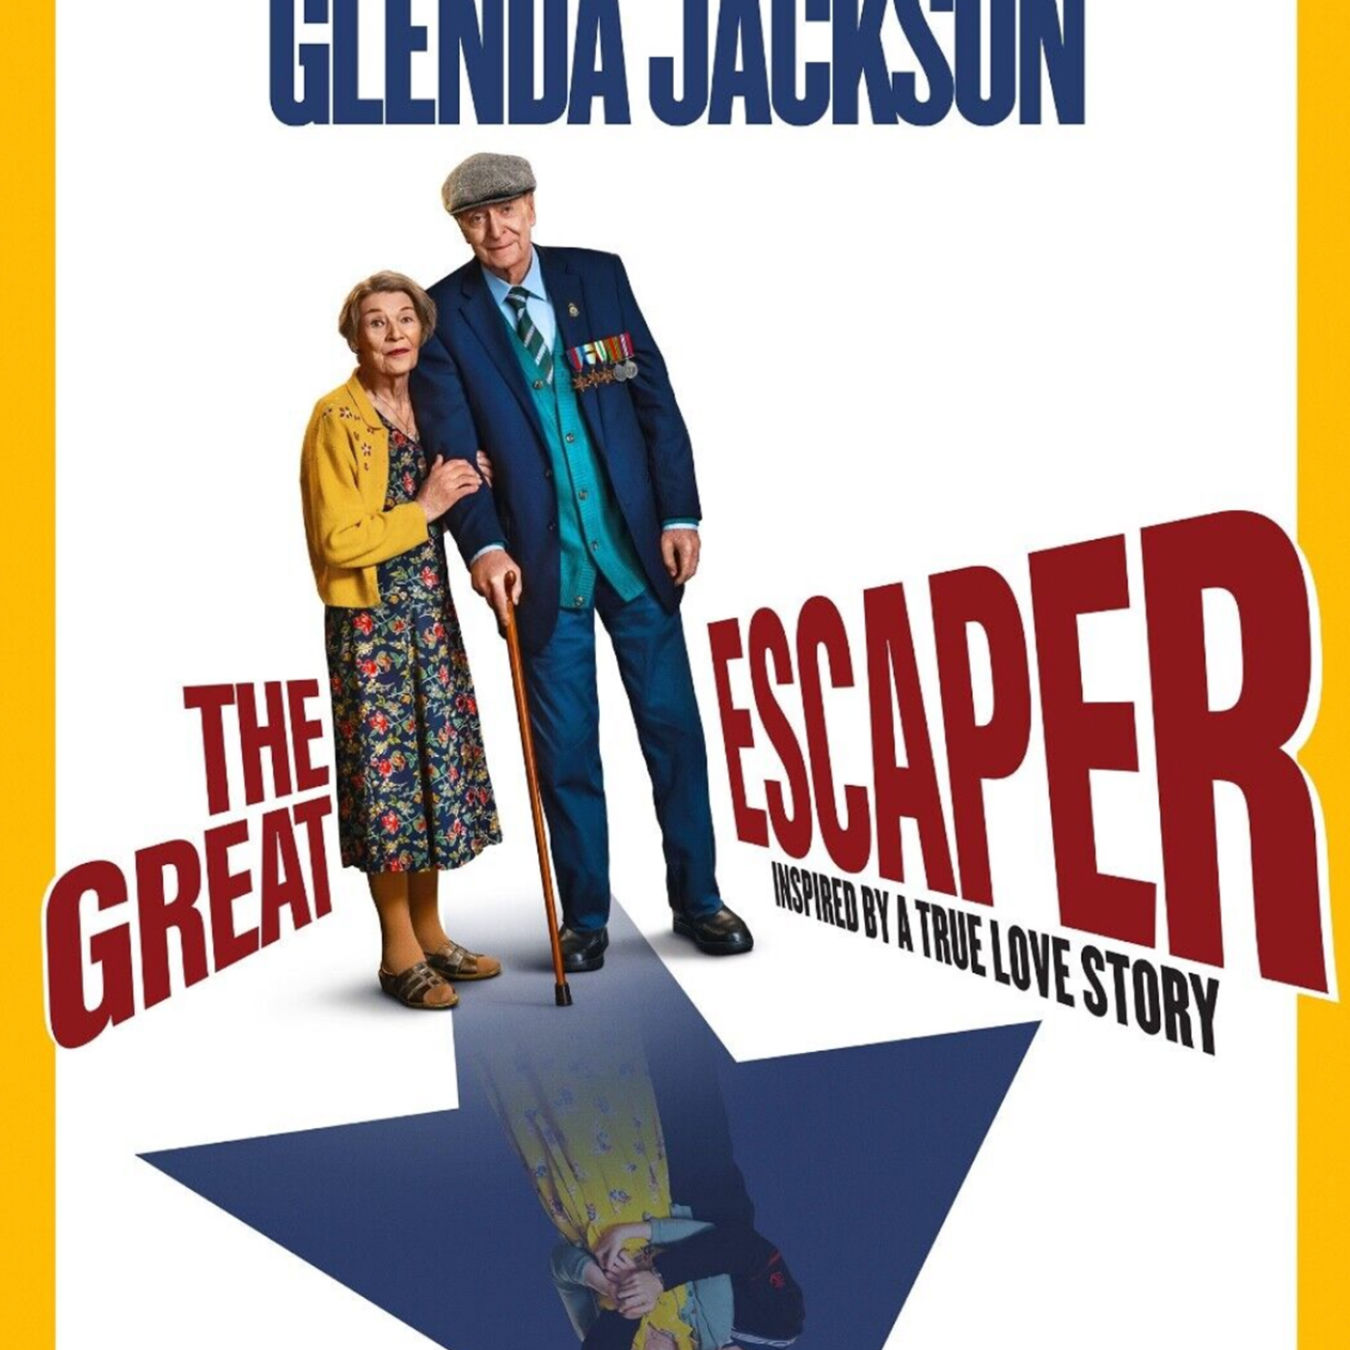 Cinema poster for The Great Escaper with Michael Caine and Glenda Jackson